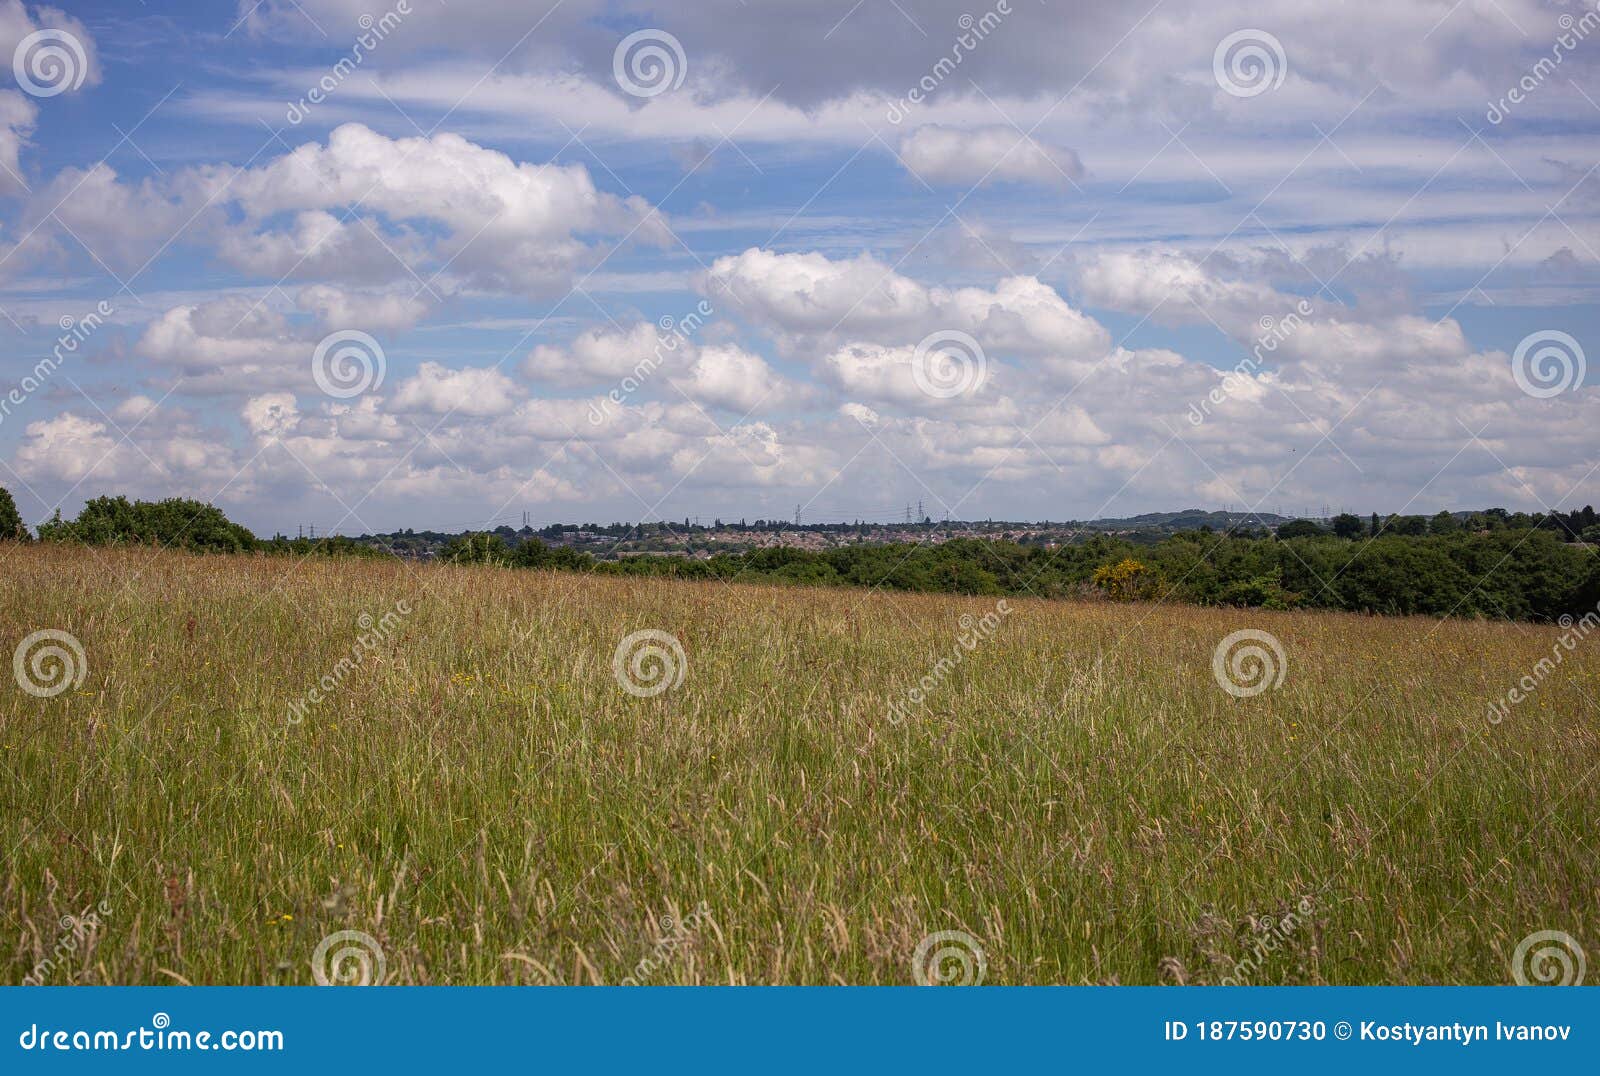 sandwell valley country park field